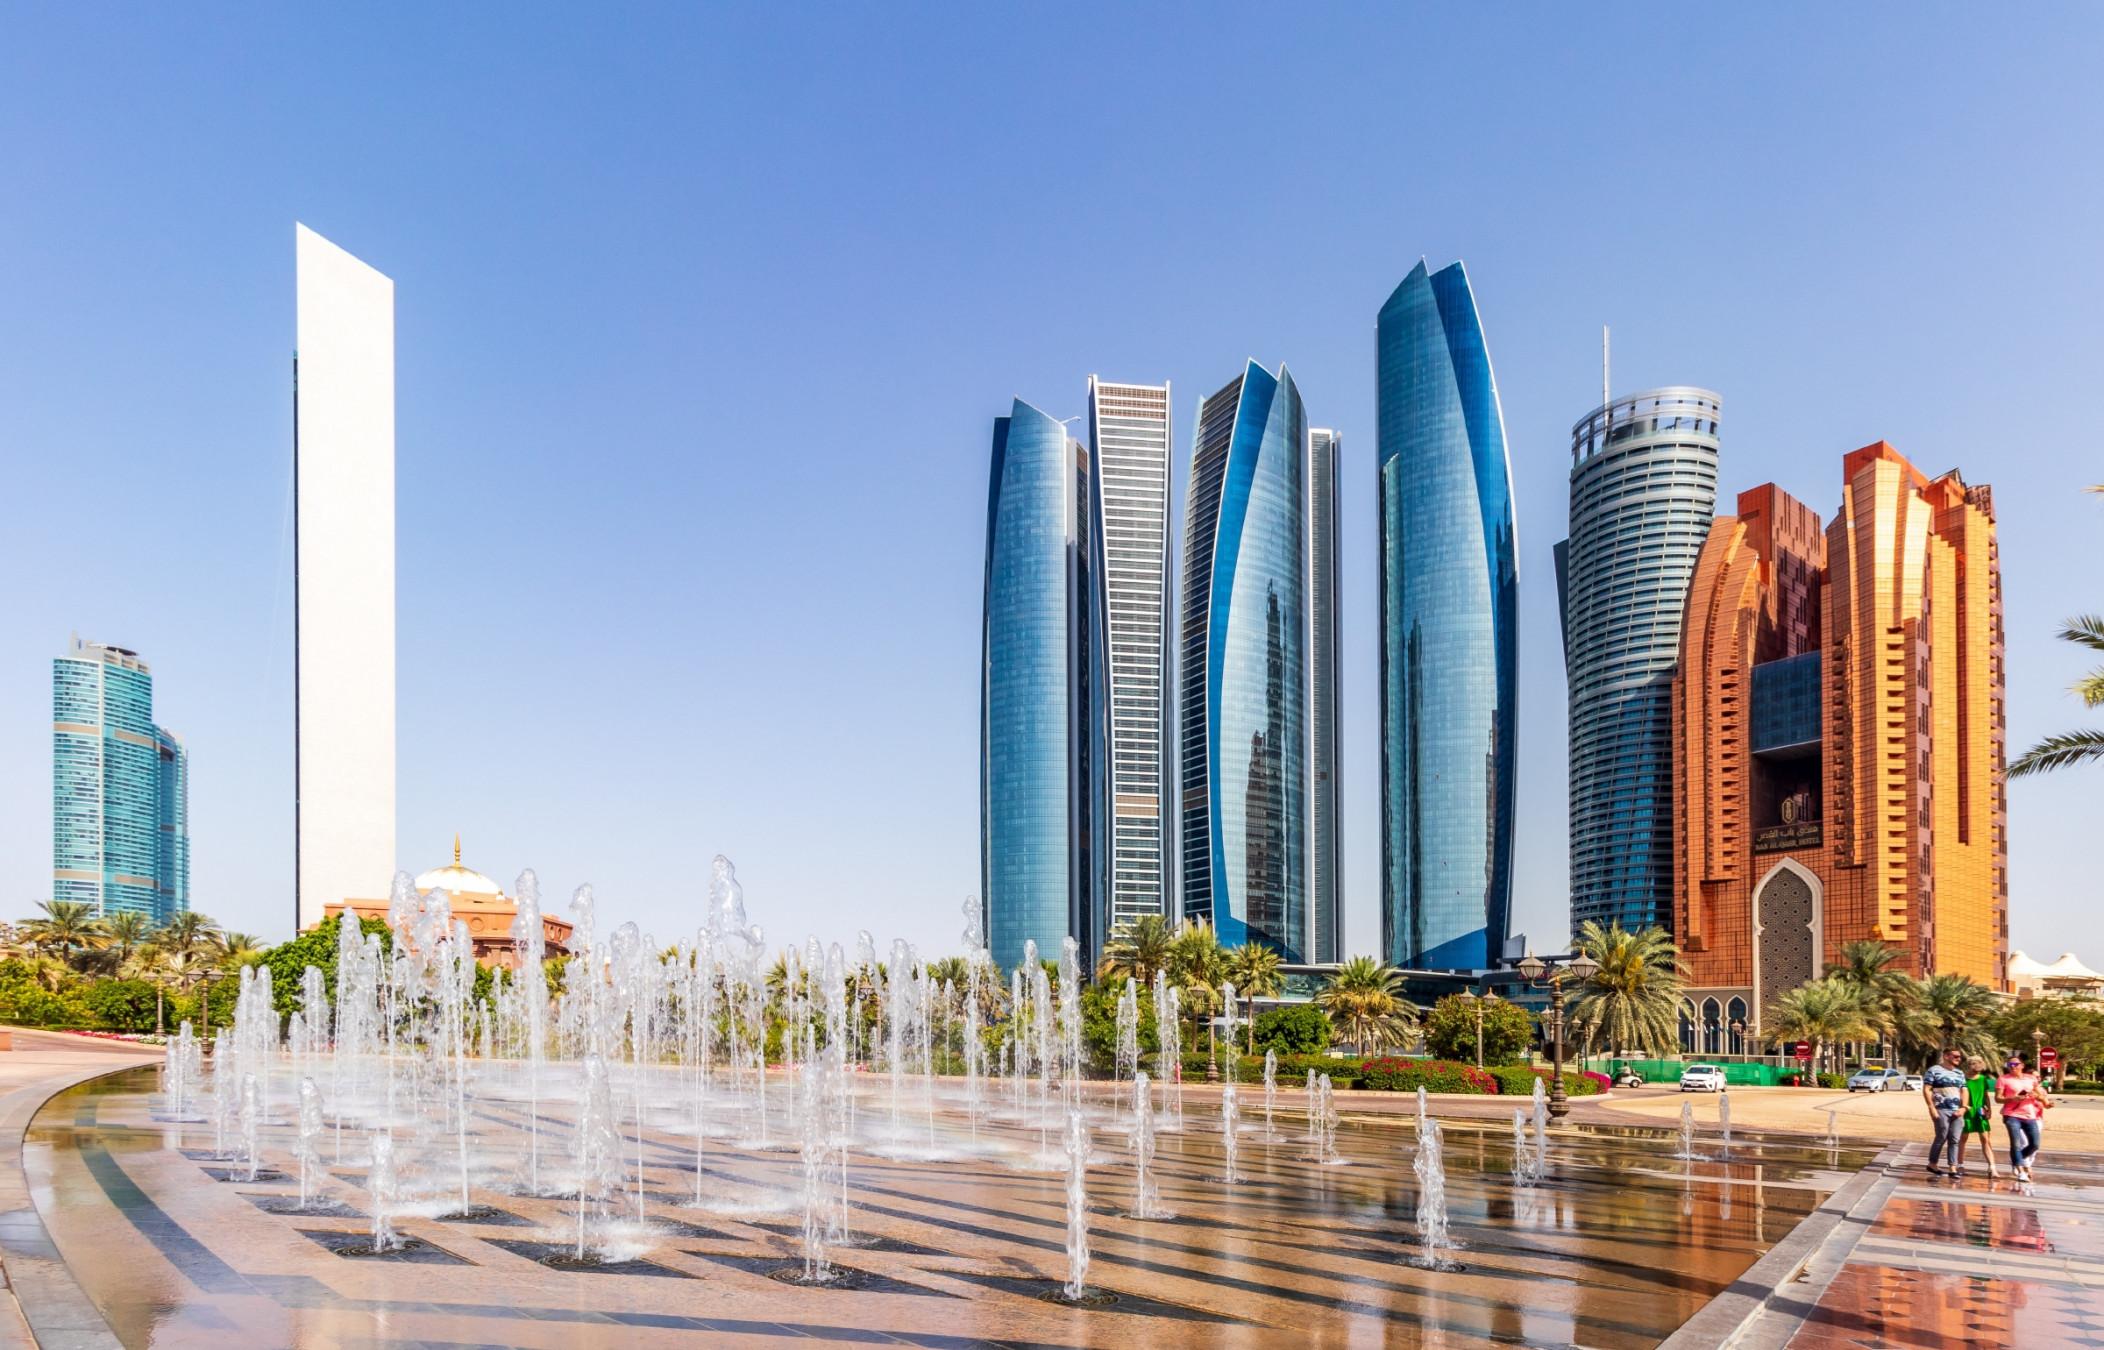 Abu Dhabi UAE proposes legal framework for decentralized economy to attract Blockchain and crypto companies